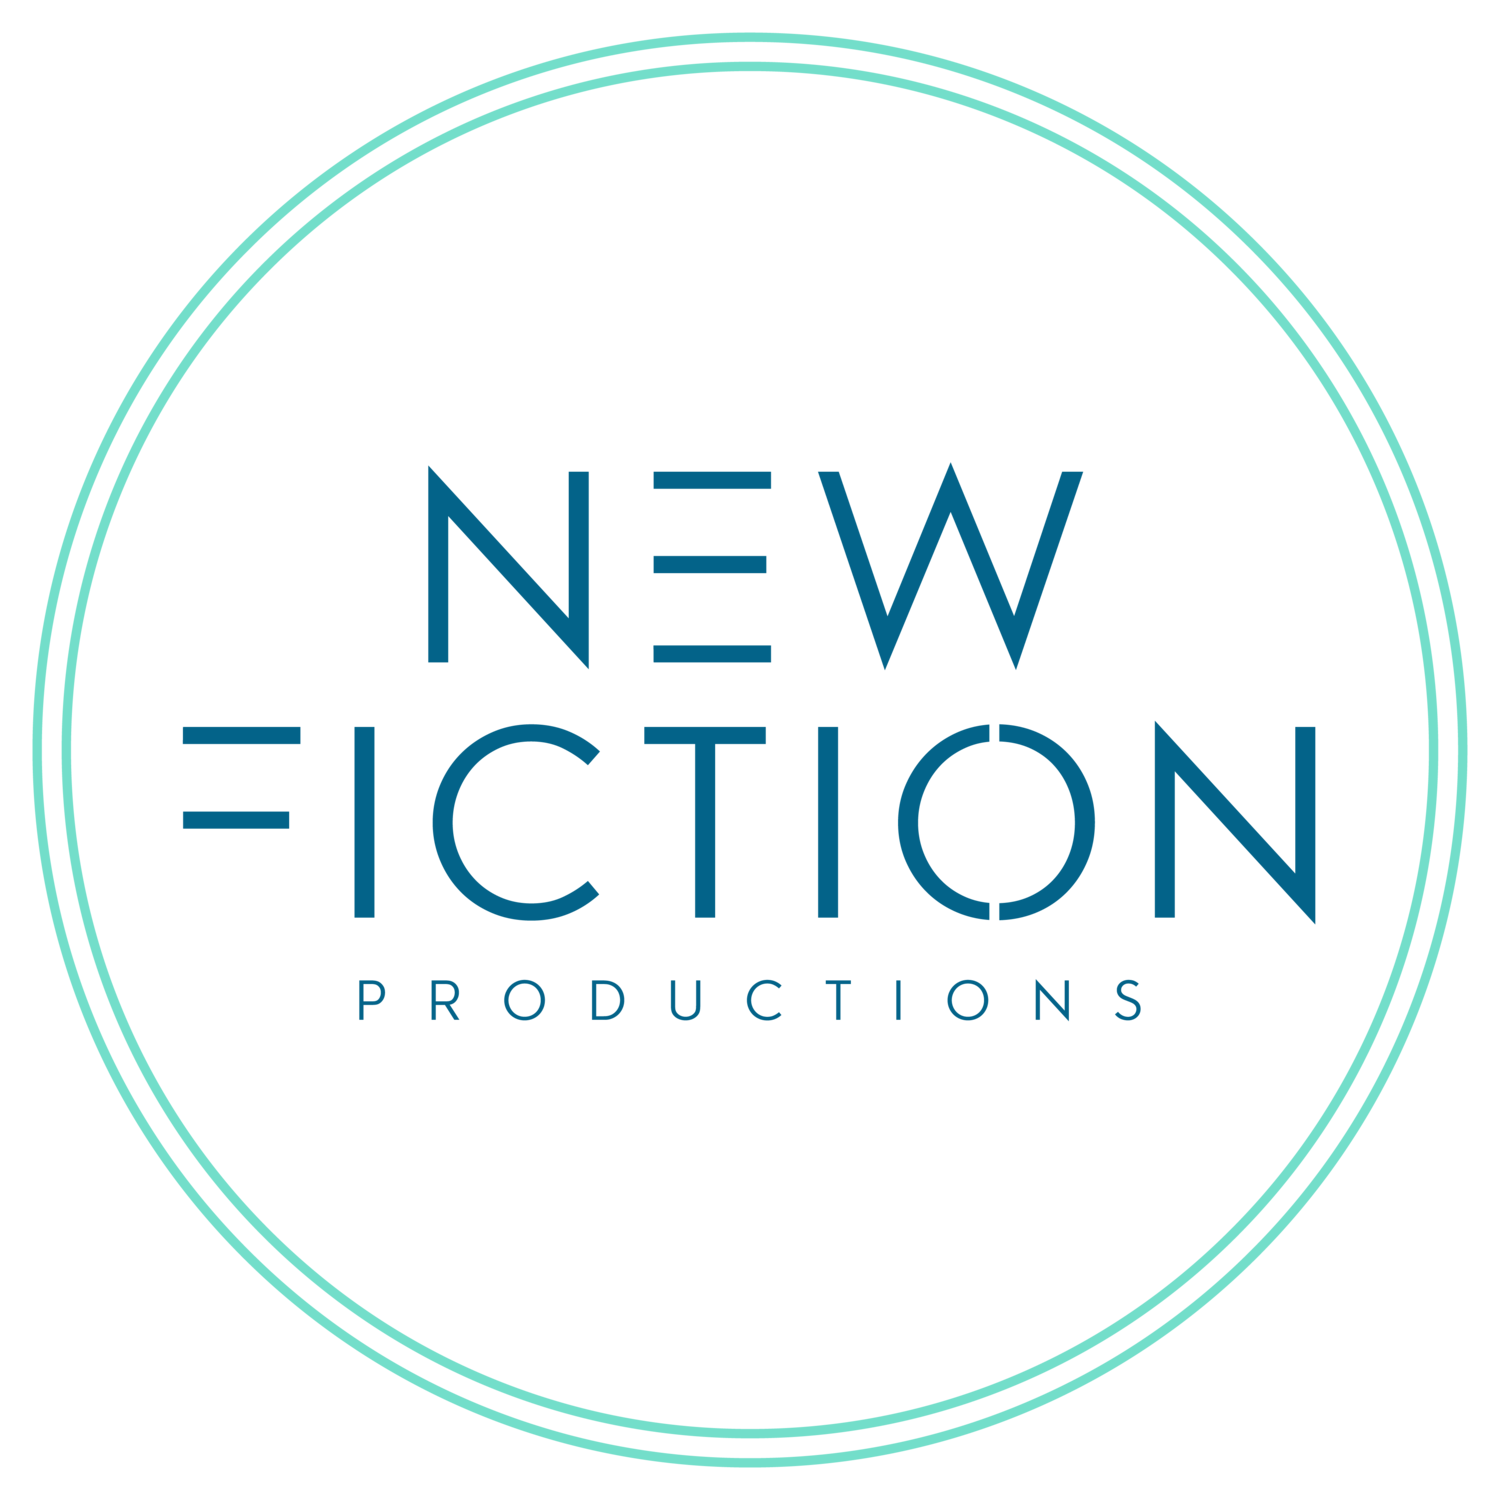 New Fiction Productions